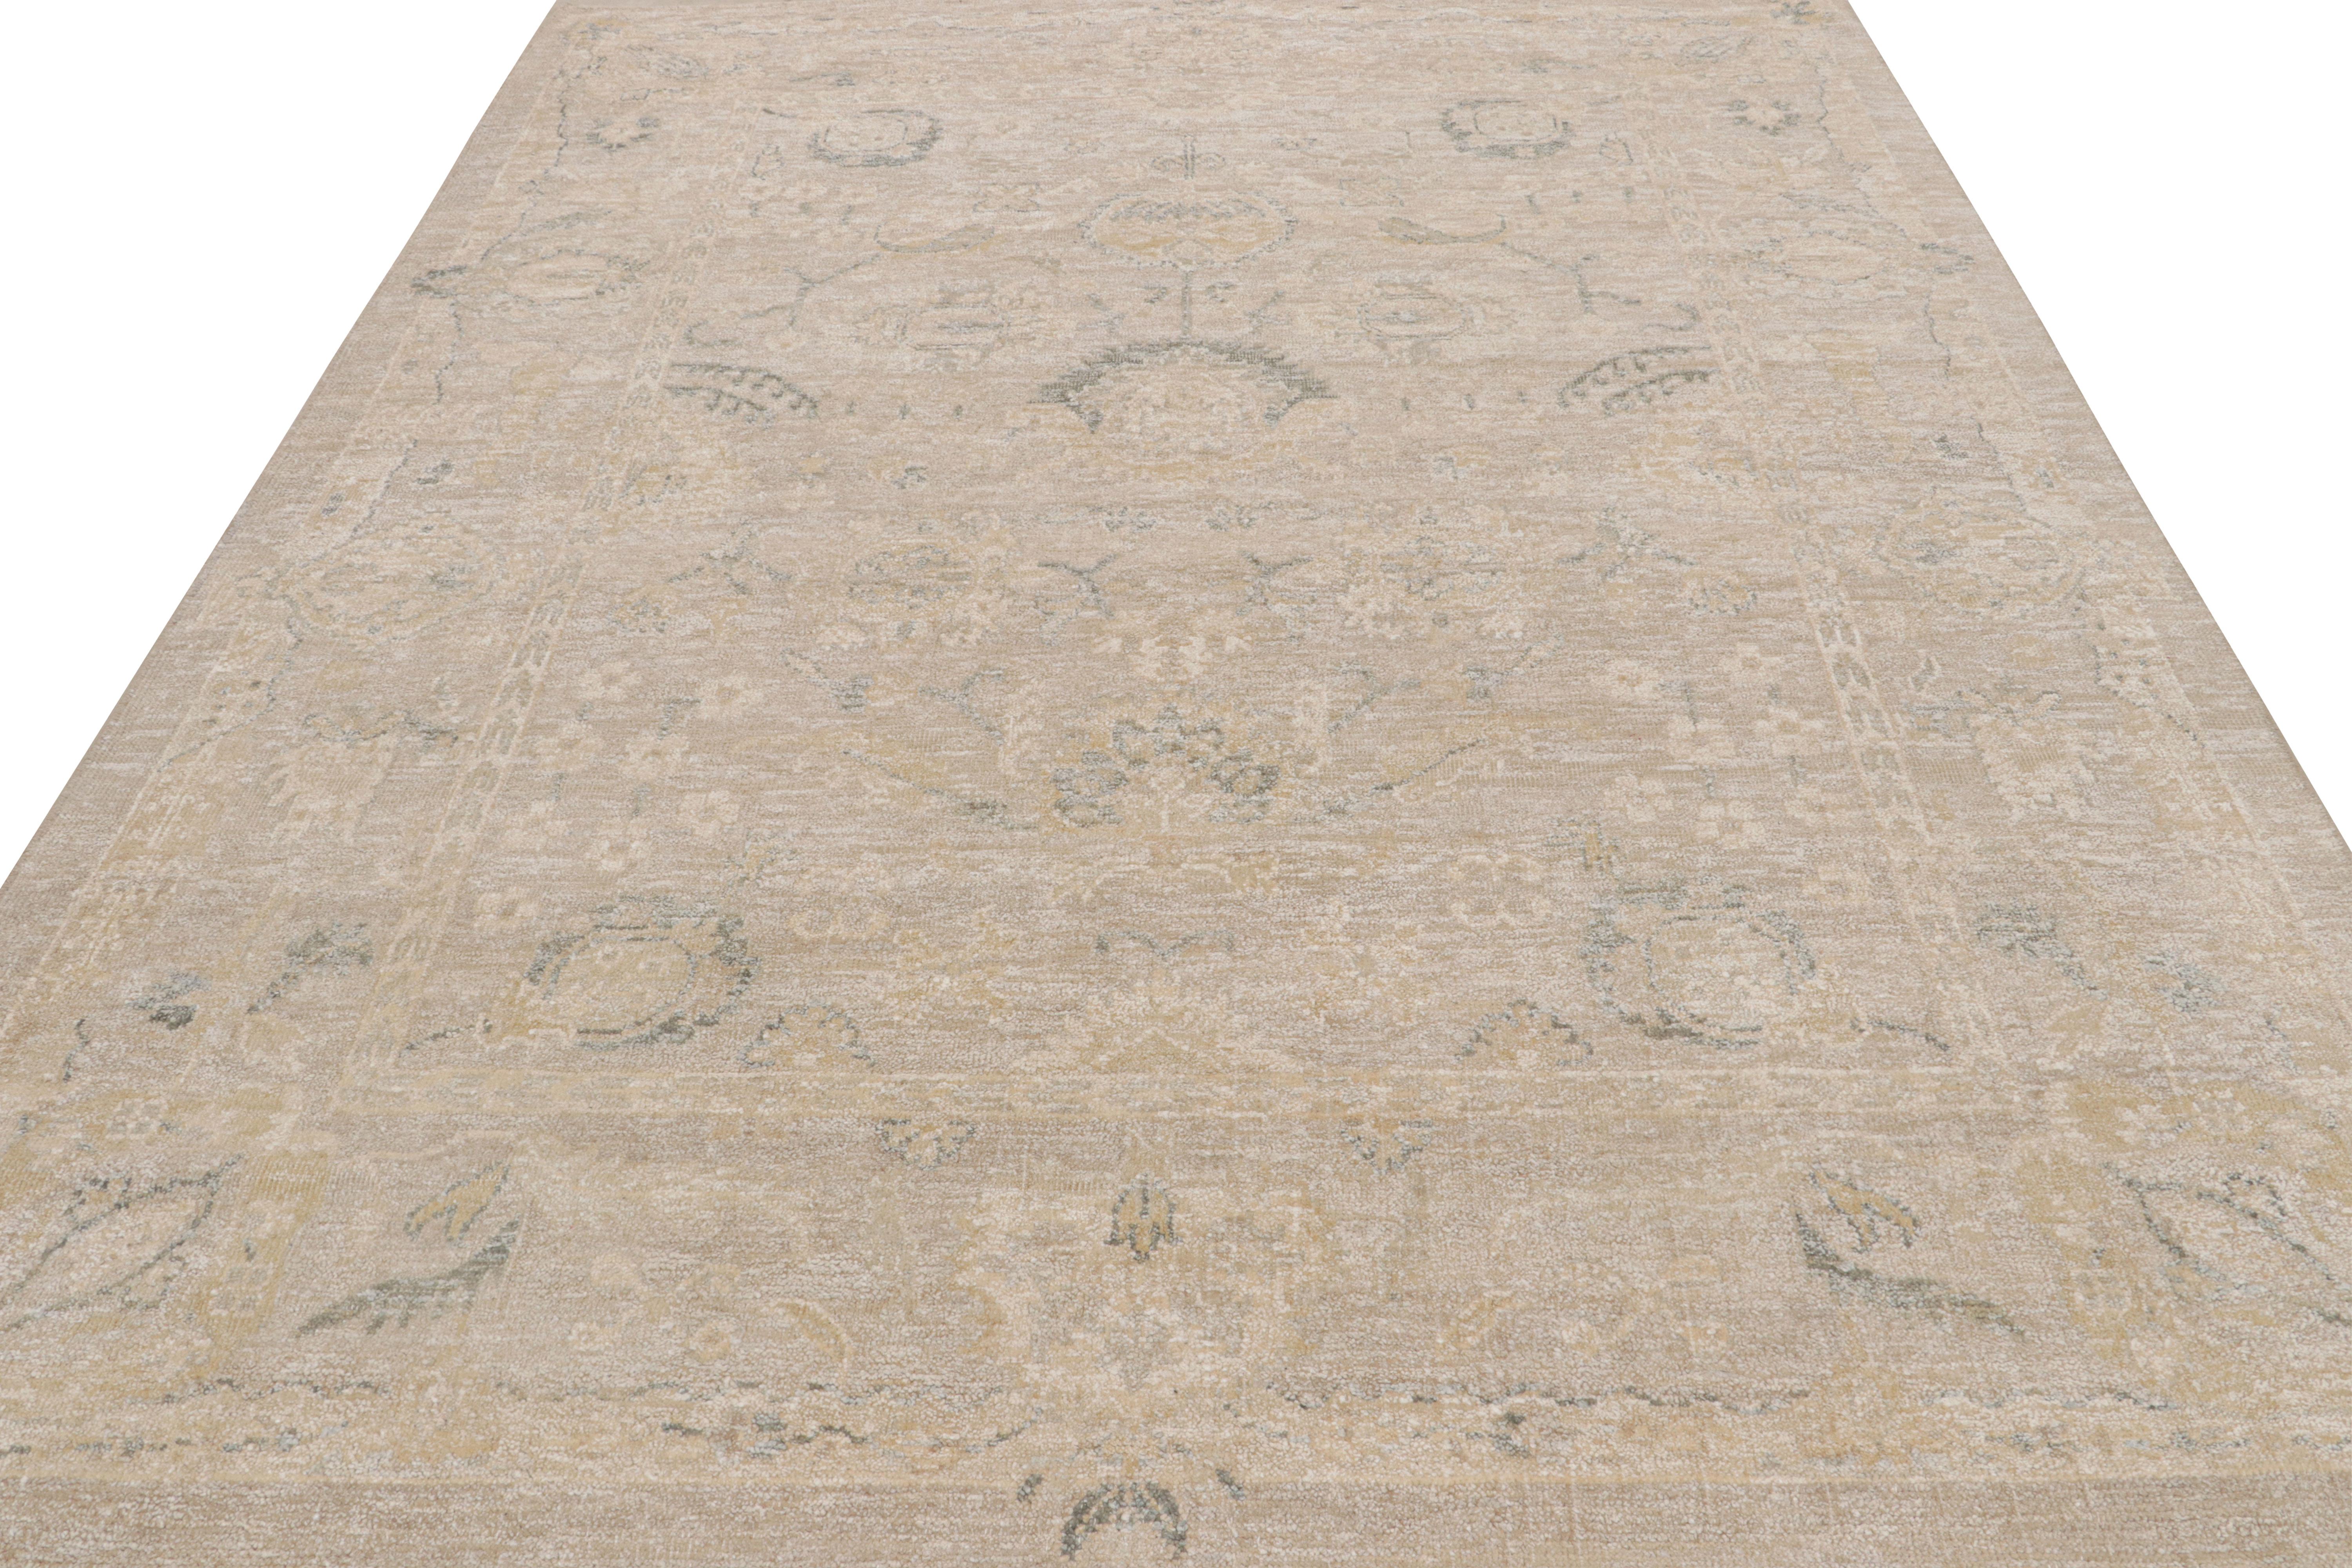 Indian Rug & Kilim’s Oushak Style Rug In Beige-Brown and Gray with Floral Patterns For Sale